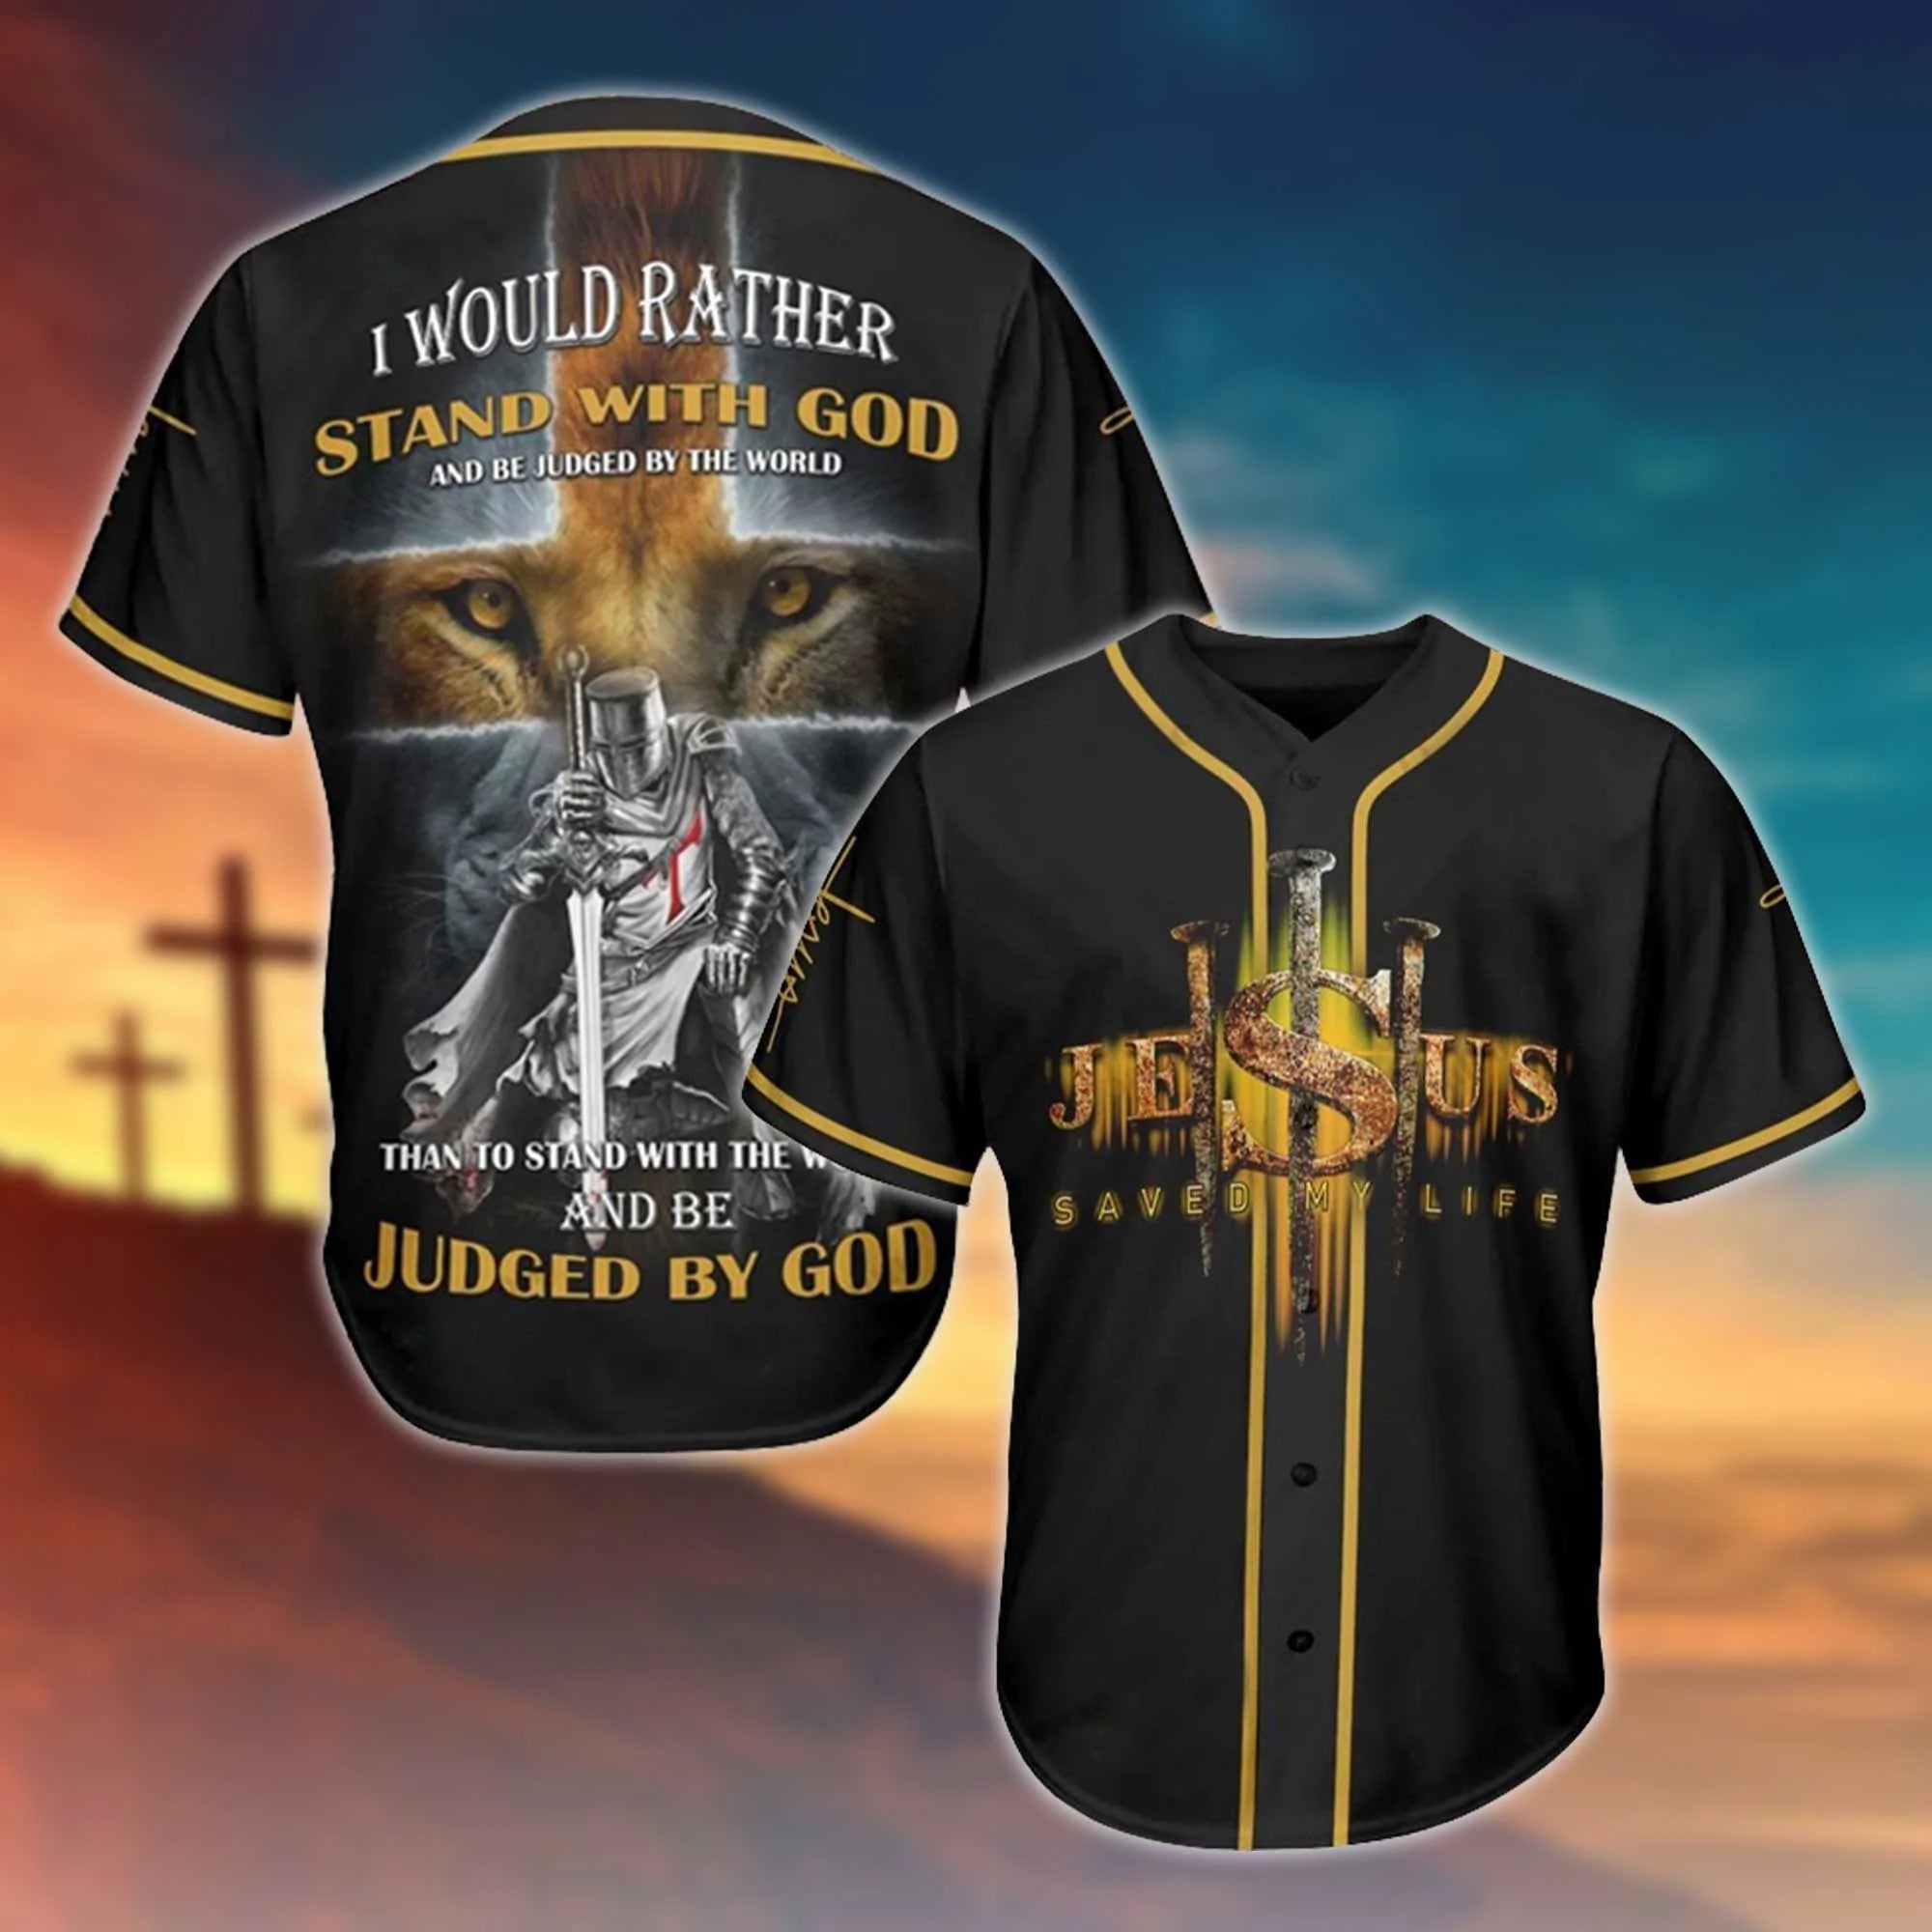 Jesus I Would Rather Stand With God Printed 3D Baseball Jersey For Men and Women